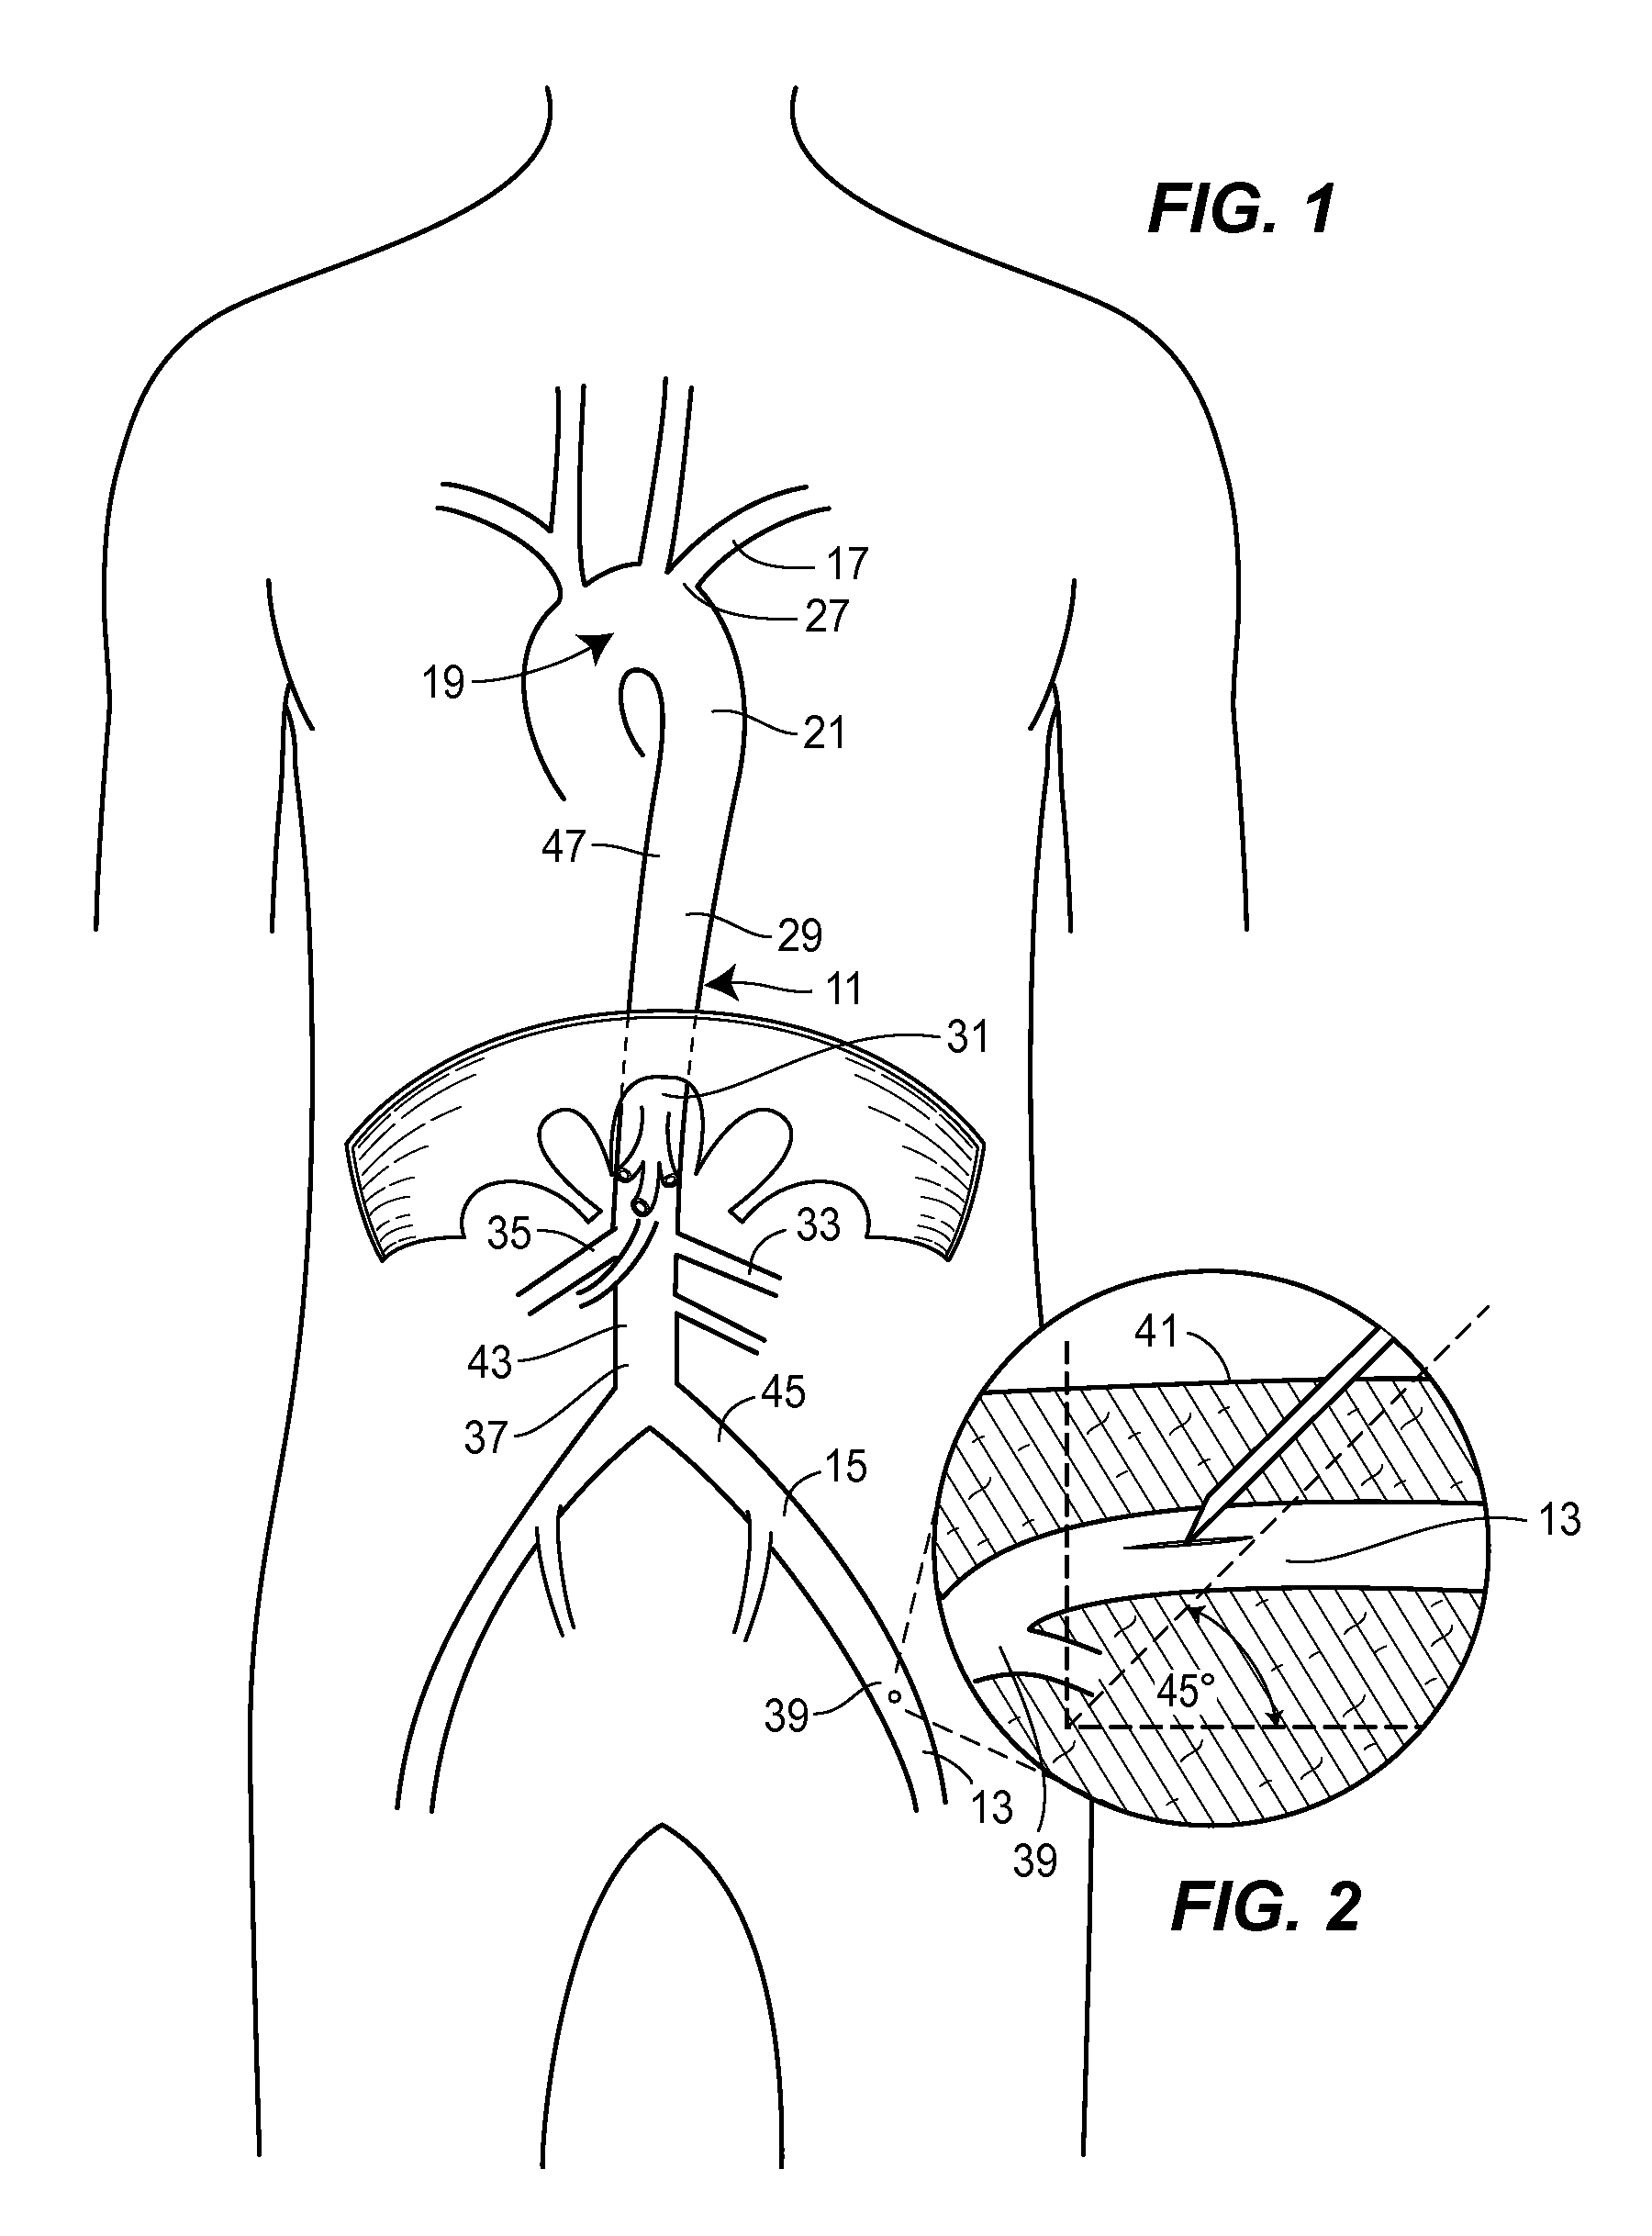 Fluoroscopy-independent, endovascular aortic occlusion system